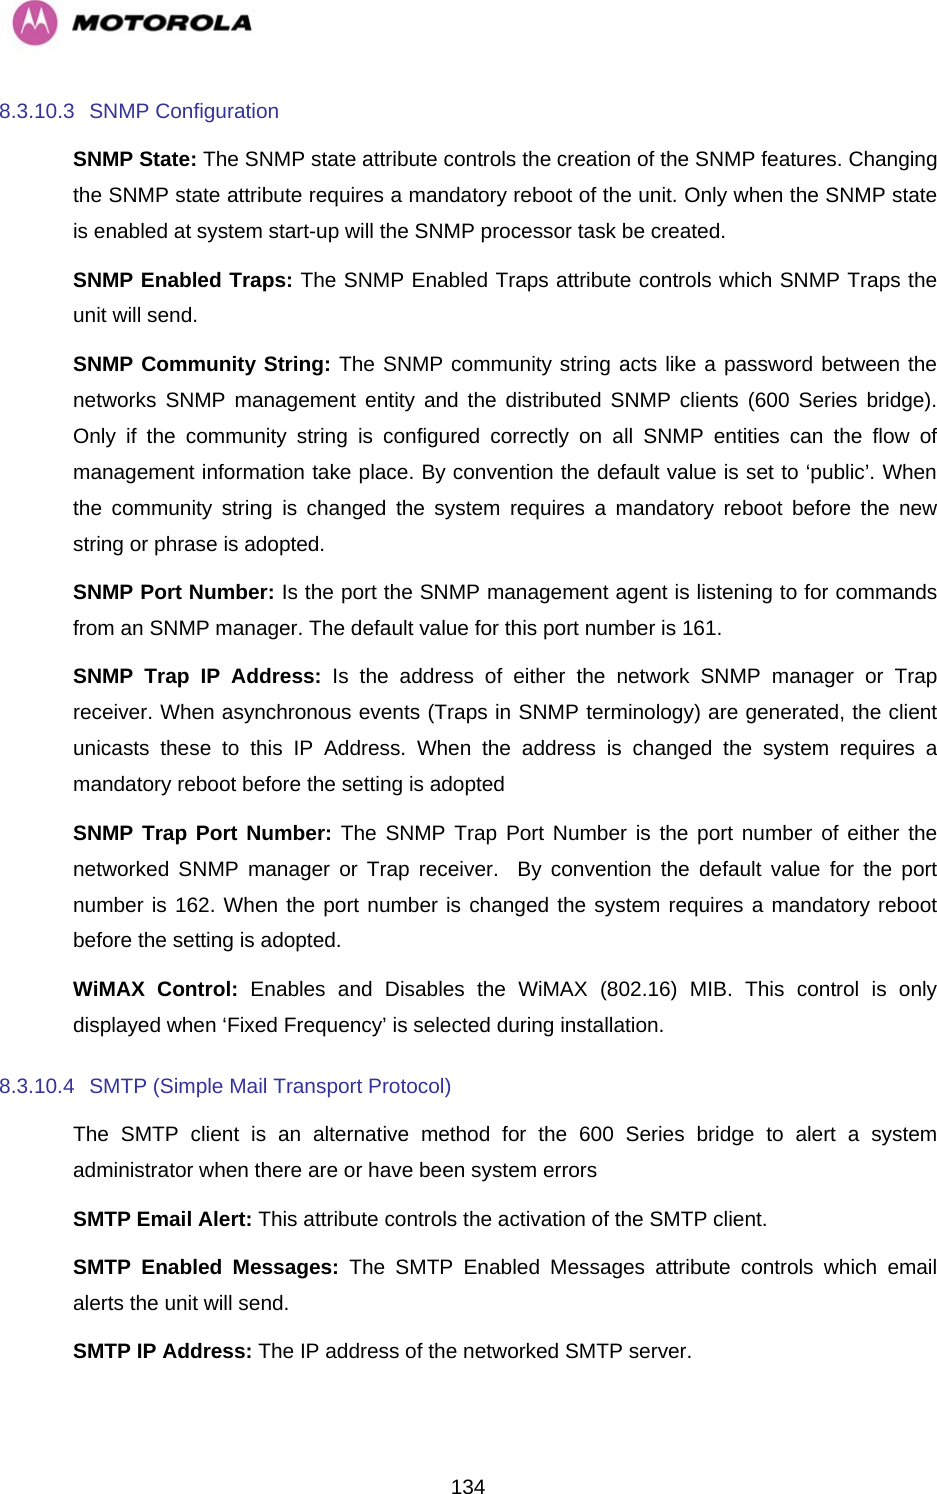   1348.3.10.3 SNMP Configuration SNMP State: The SNMP state attribute controls the creation of the SNMP features. Changing the SNMP state attribute requires a mandatory reboot of the unit. Only when the SNMP state is enabled at system start-up will the SNMP processor task be created. SNMP Enabled Traps: The SNMP Enabled Traps attribute controls which SNMP Traps the unit will send. SNMP Community String: The SNMP community string acts like a password between the networks SNMP management entity and the distributed SNMP clients (600 Series bridge). Only if the community string is configured correctly on all SNMP entities can the flow of management information take place. By convention the default value is set to ‘public’. When the community string is changed the system requires a mandatory reboot before the new string or phrase is adopted. SNMP Port Number: Is the port the SNMP management agent is listening to for commands from an SNMP manager. The default value for this port number is 161. SNMP Trap IP Address: Is the address of either the network SNMP manager or Trap receiver. When asynchronous events (Traps in SNMP terminology) are generated, the client unicasts these to this IP Address. When the address is changed the system requires a mandatory reboot before the setting is adopted SNMP Trap Port Number: The SNMP Trap Port Number is the port number of either the networked SNMP manager or Trap receiver.  By convention the default value for the port number is 162. When the port number is changed the system requires a mandatory reboot before the setting is adopted. WiMAX Control: Enables and Disables the WiMAX (802.16) MIB. This control is only displayed when ‘Fixed Frequency’ is selected during installation. 8.3.10.4  SMTP (Simple Mail Transport Protocol) The SMTP client is an alternative method for the 600 Series bridge to alert a system administrator when there are or have been system errors SMTP Email Alert: This attribute controls the activation of the SMTP client. SMTP Enabled Messages: The SMTP Enabled Messages attribute controls which email alerts the unit will send. SMTP IP Address: The IP address of the networked SMTP server. 